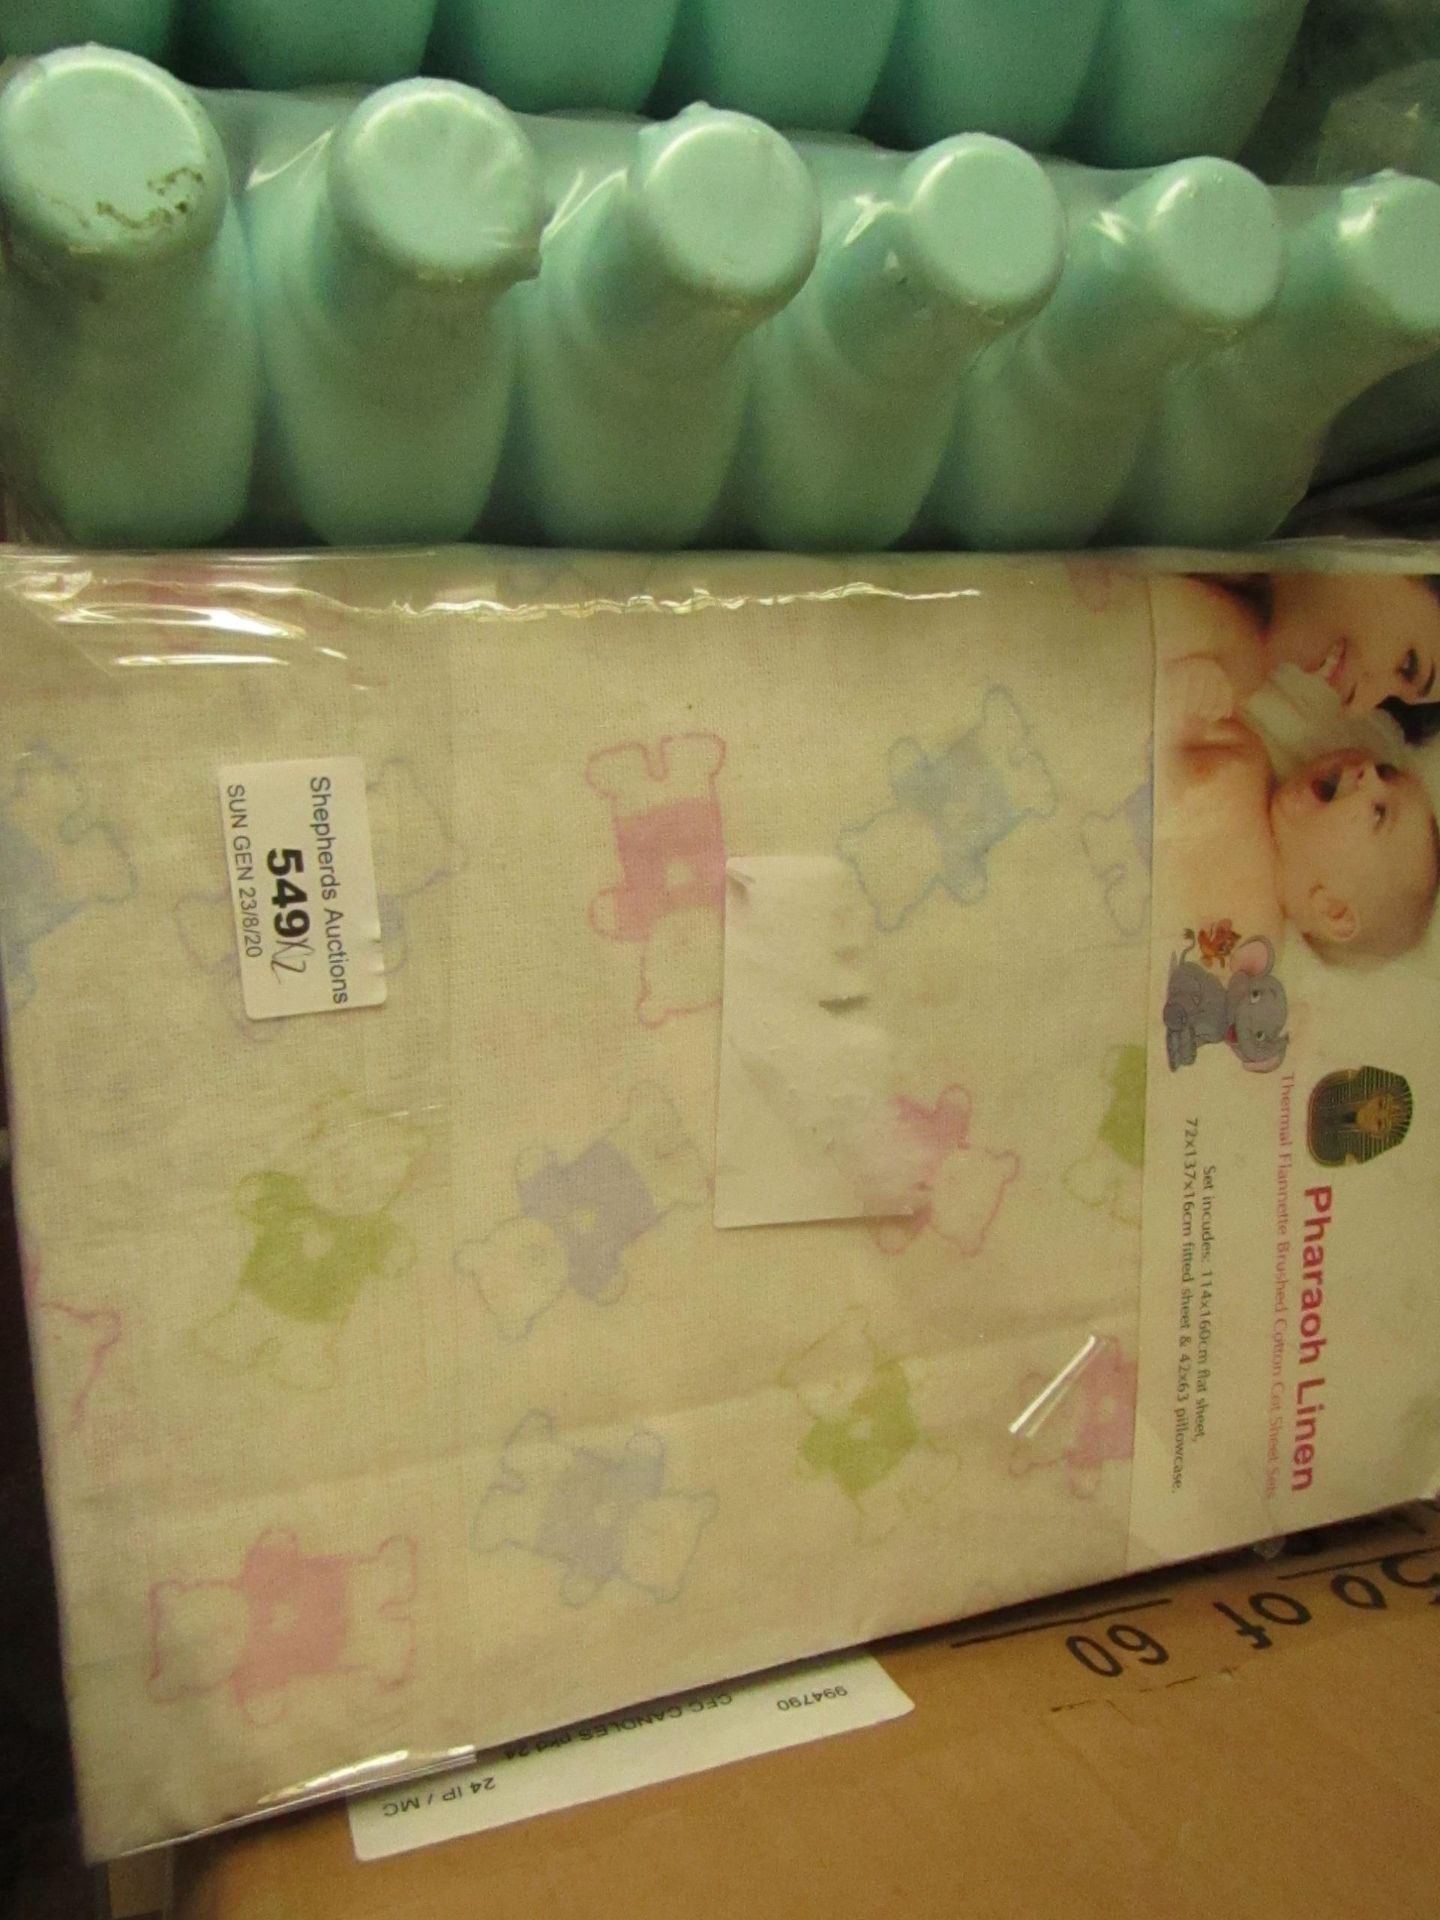 2 x Pharaoh Linen Thermal Flannette Cot Sheet sets. Unsued & Packaged